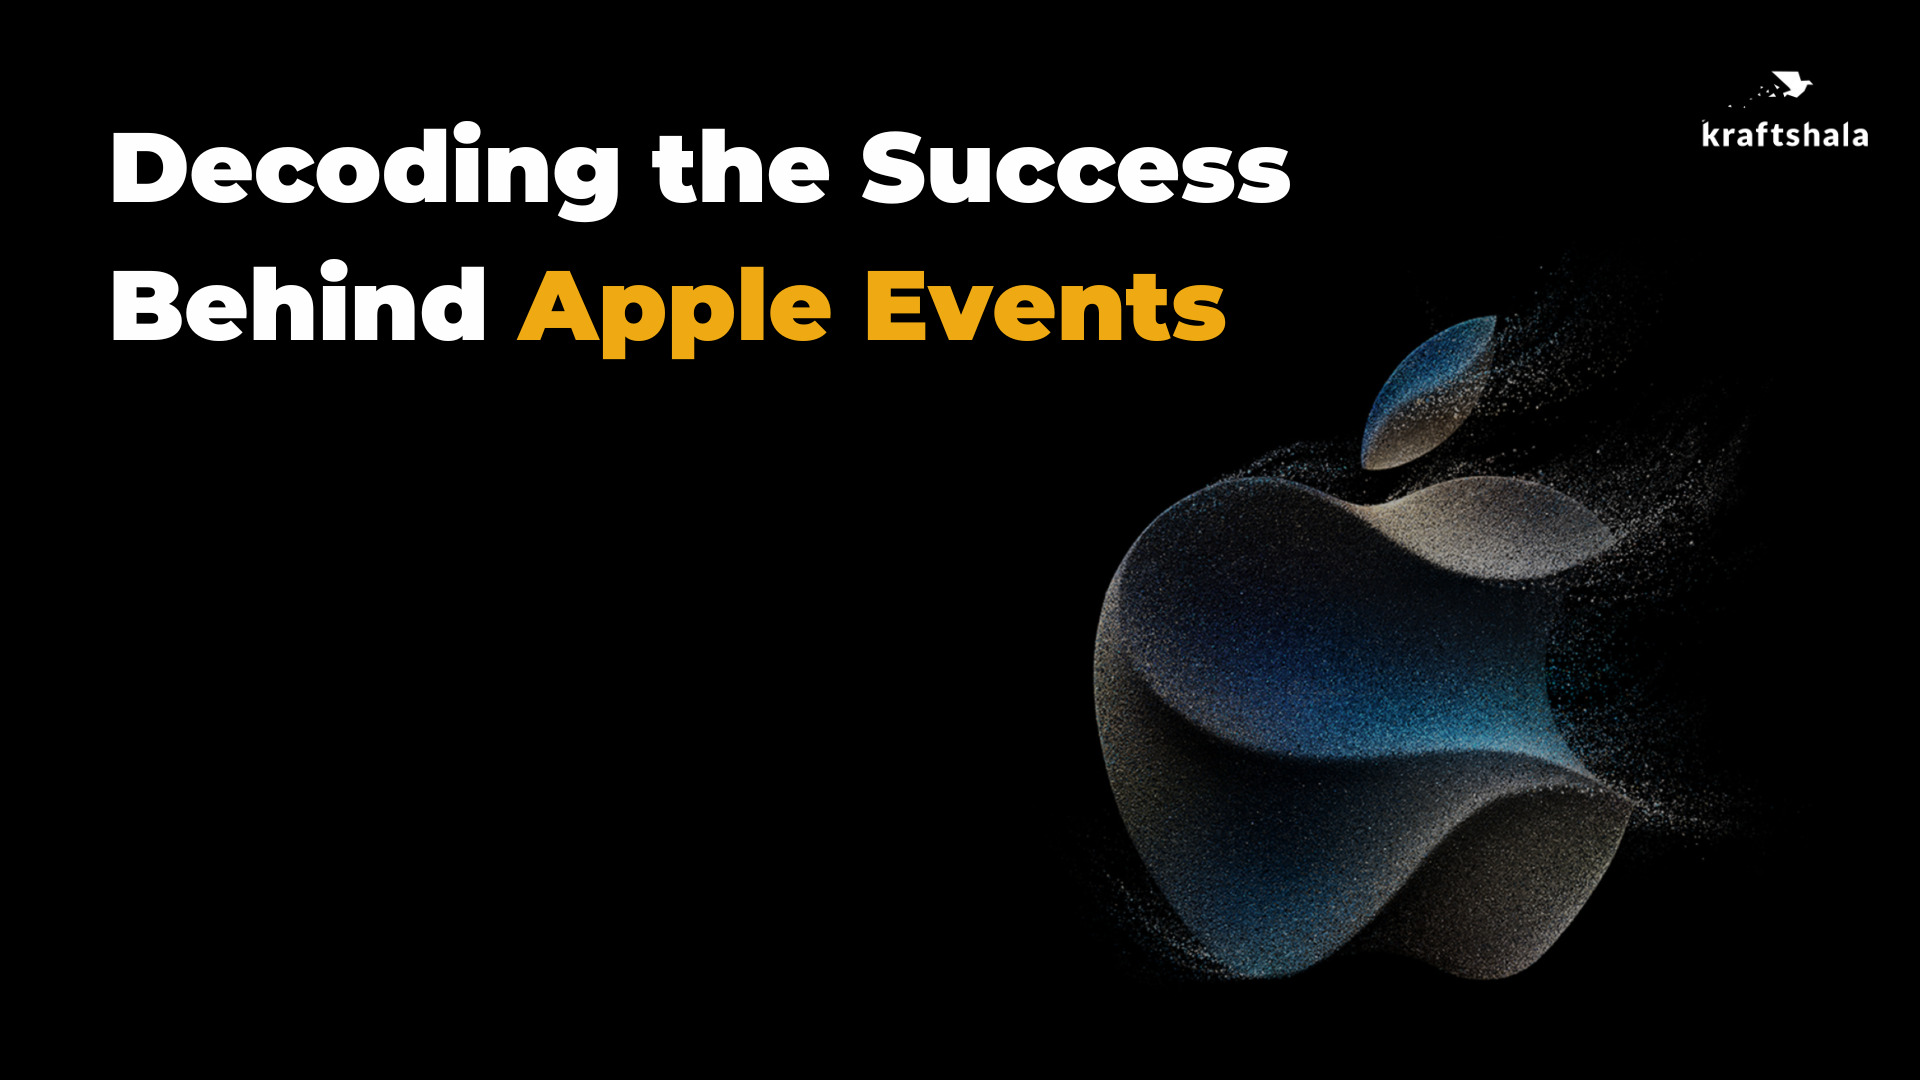 10 Marketing Secrets Behind Apple’s Iconic Product Launch Events